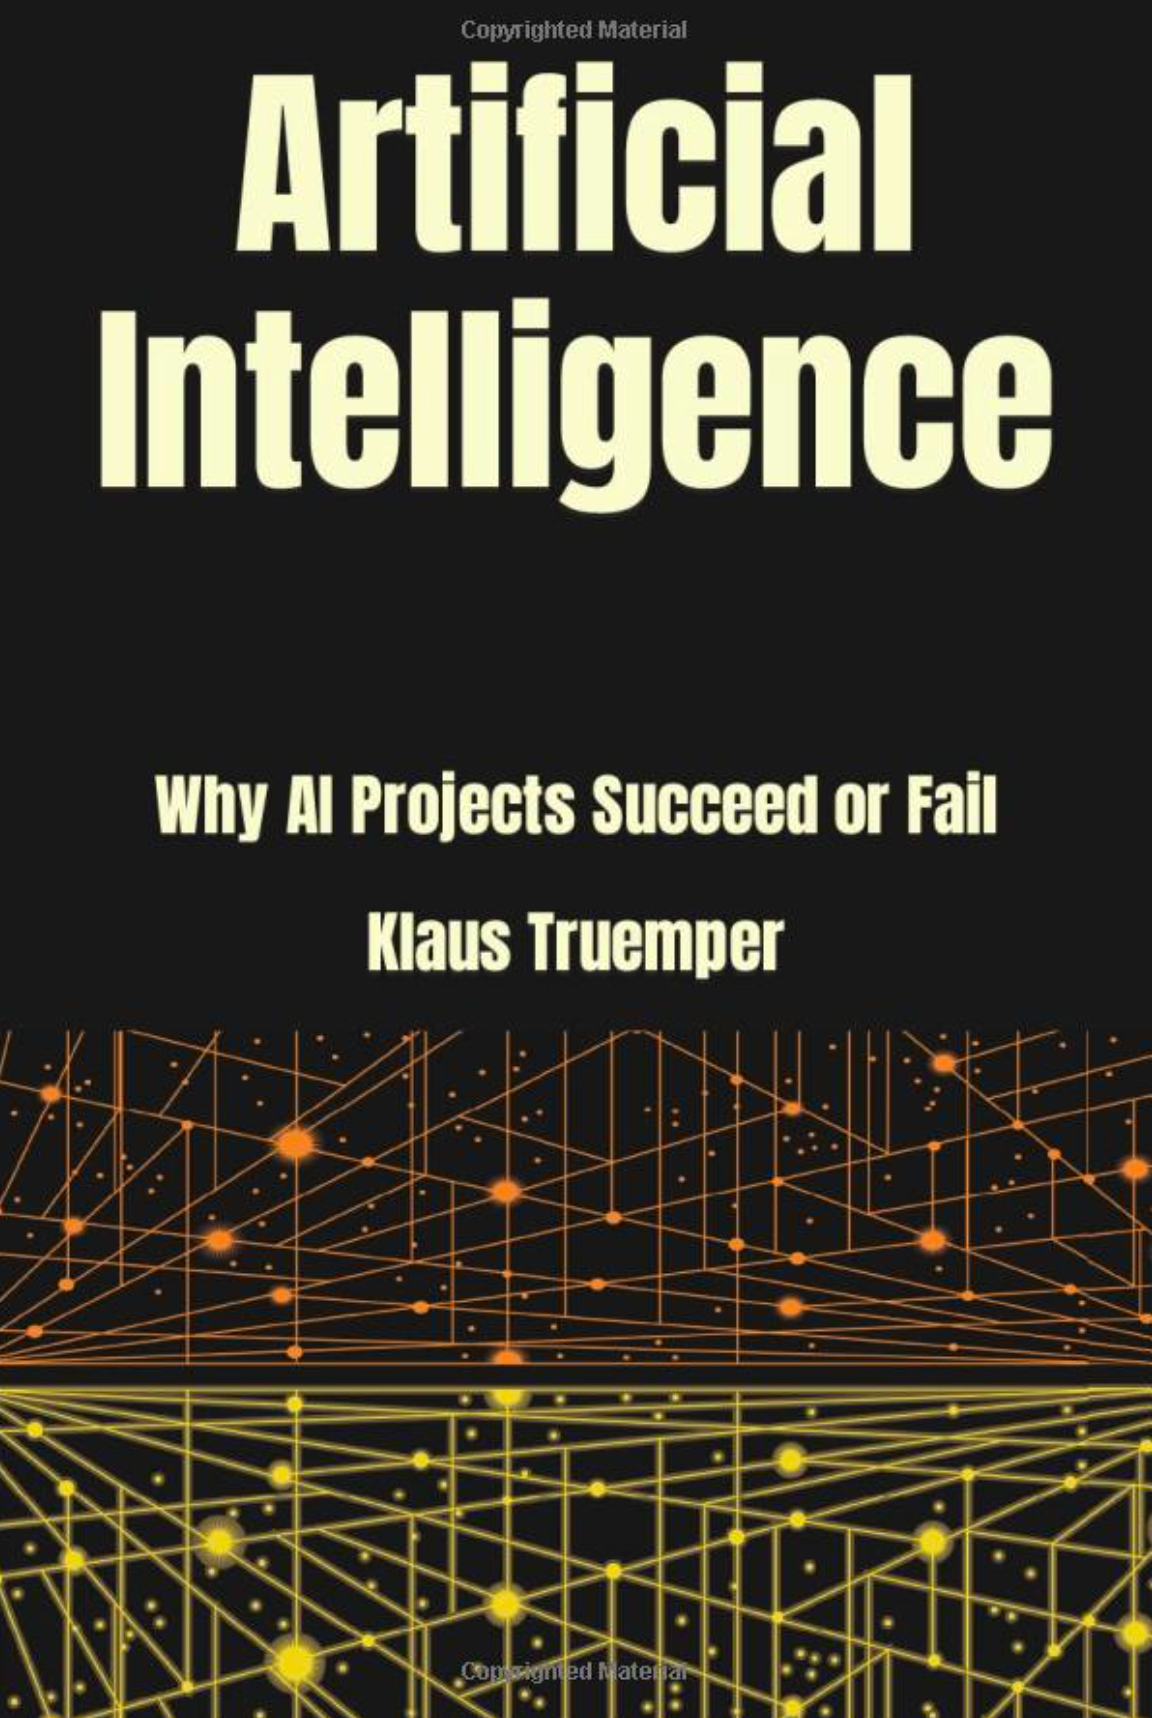 Book cover, Artificial Intelligence, why A.I. projects succeed or fail. Klaus Truemper.